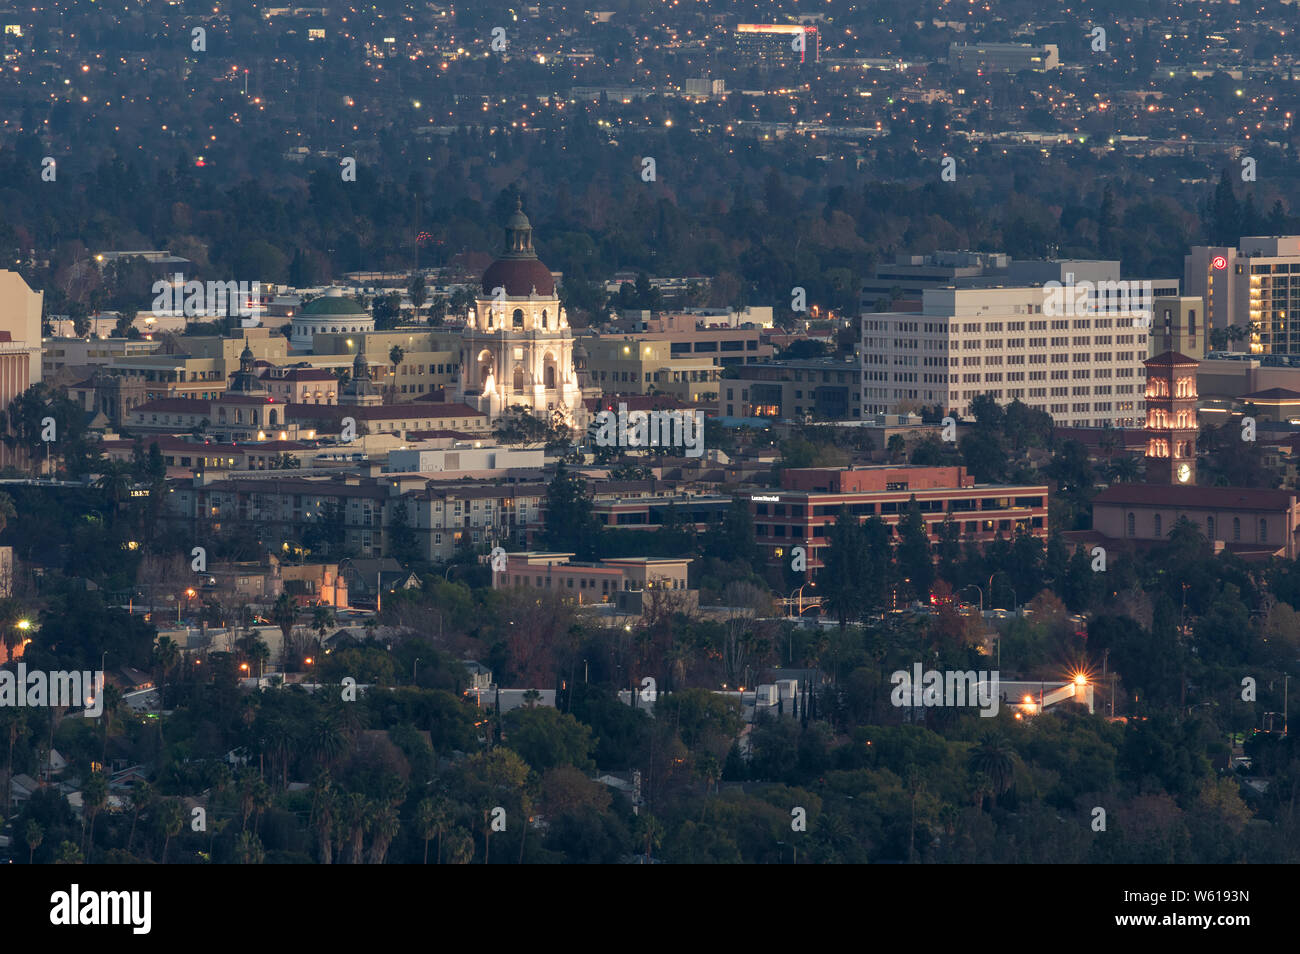 View from above of Pasadena in California. The landmark Pasadena City Hall and Saint Andrew catholic church are shown in the middle ground. Stock Photo